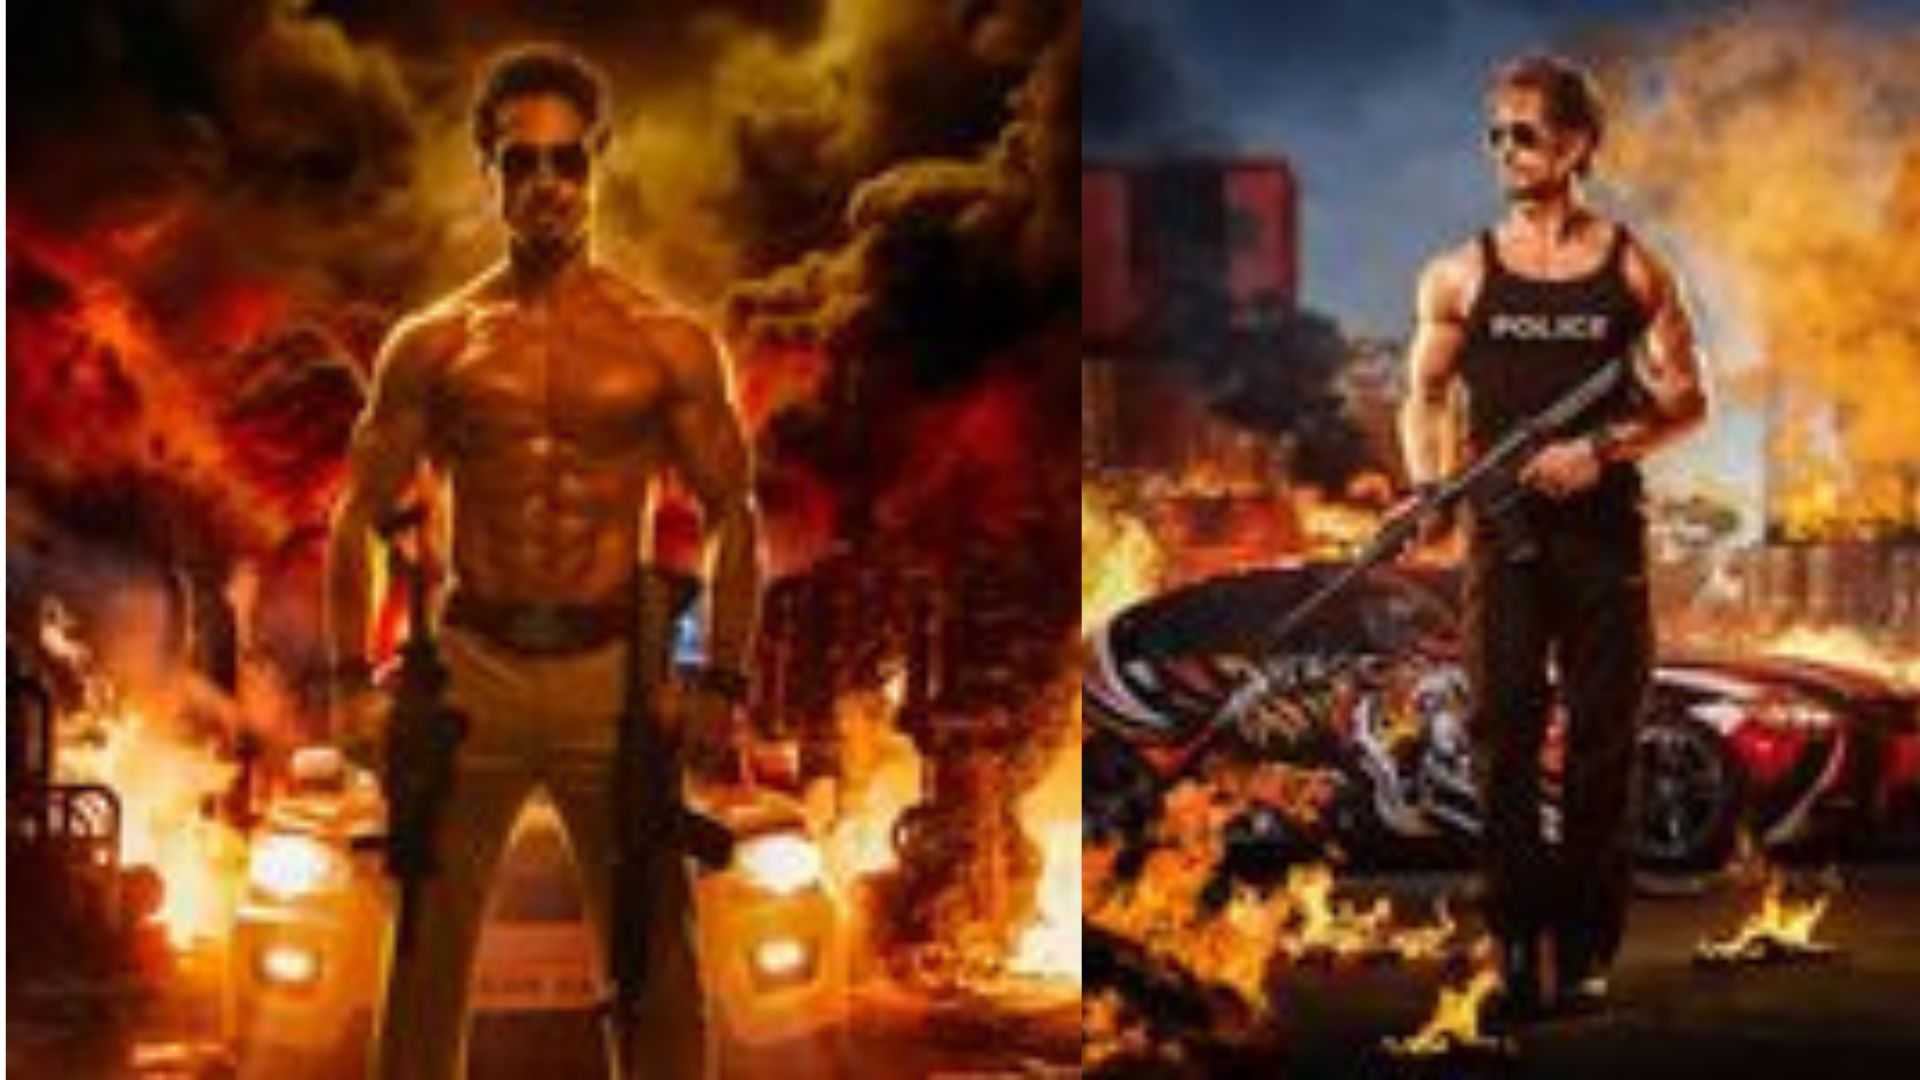 Singham Again: Akshay Kumar introduces Tiger Shroff as ACP Satya, says 'my brother from another mother'